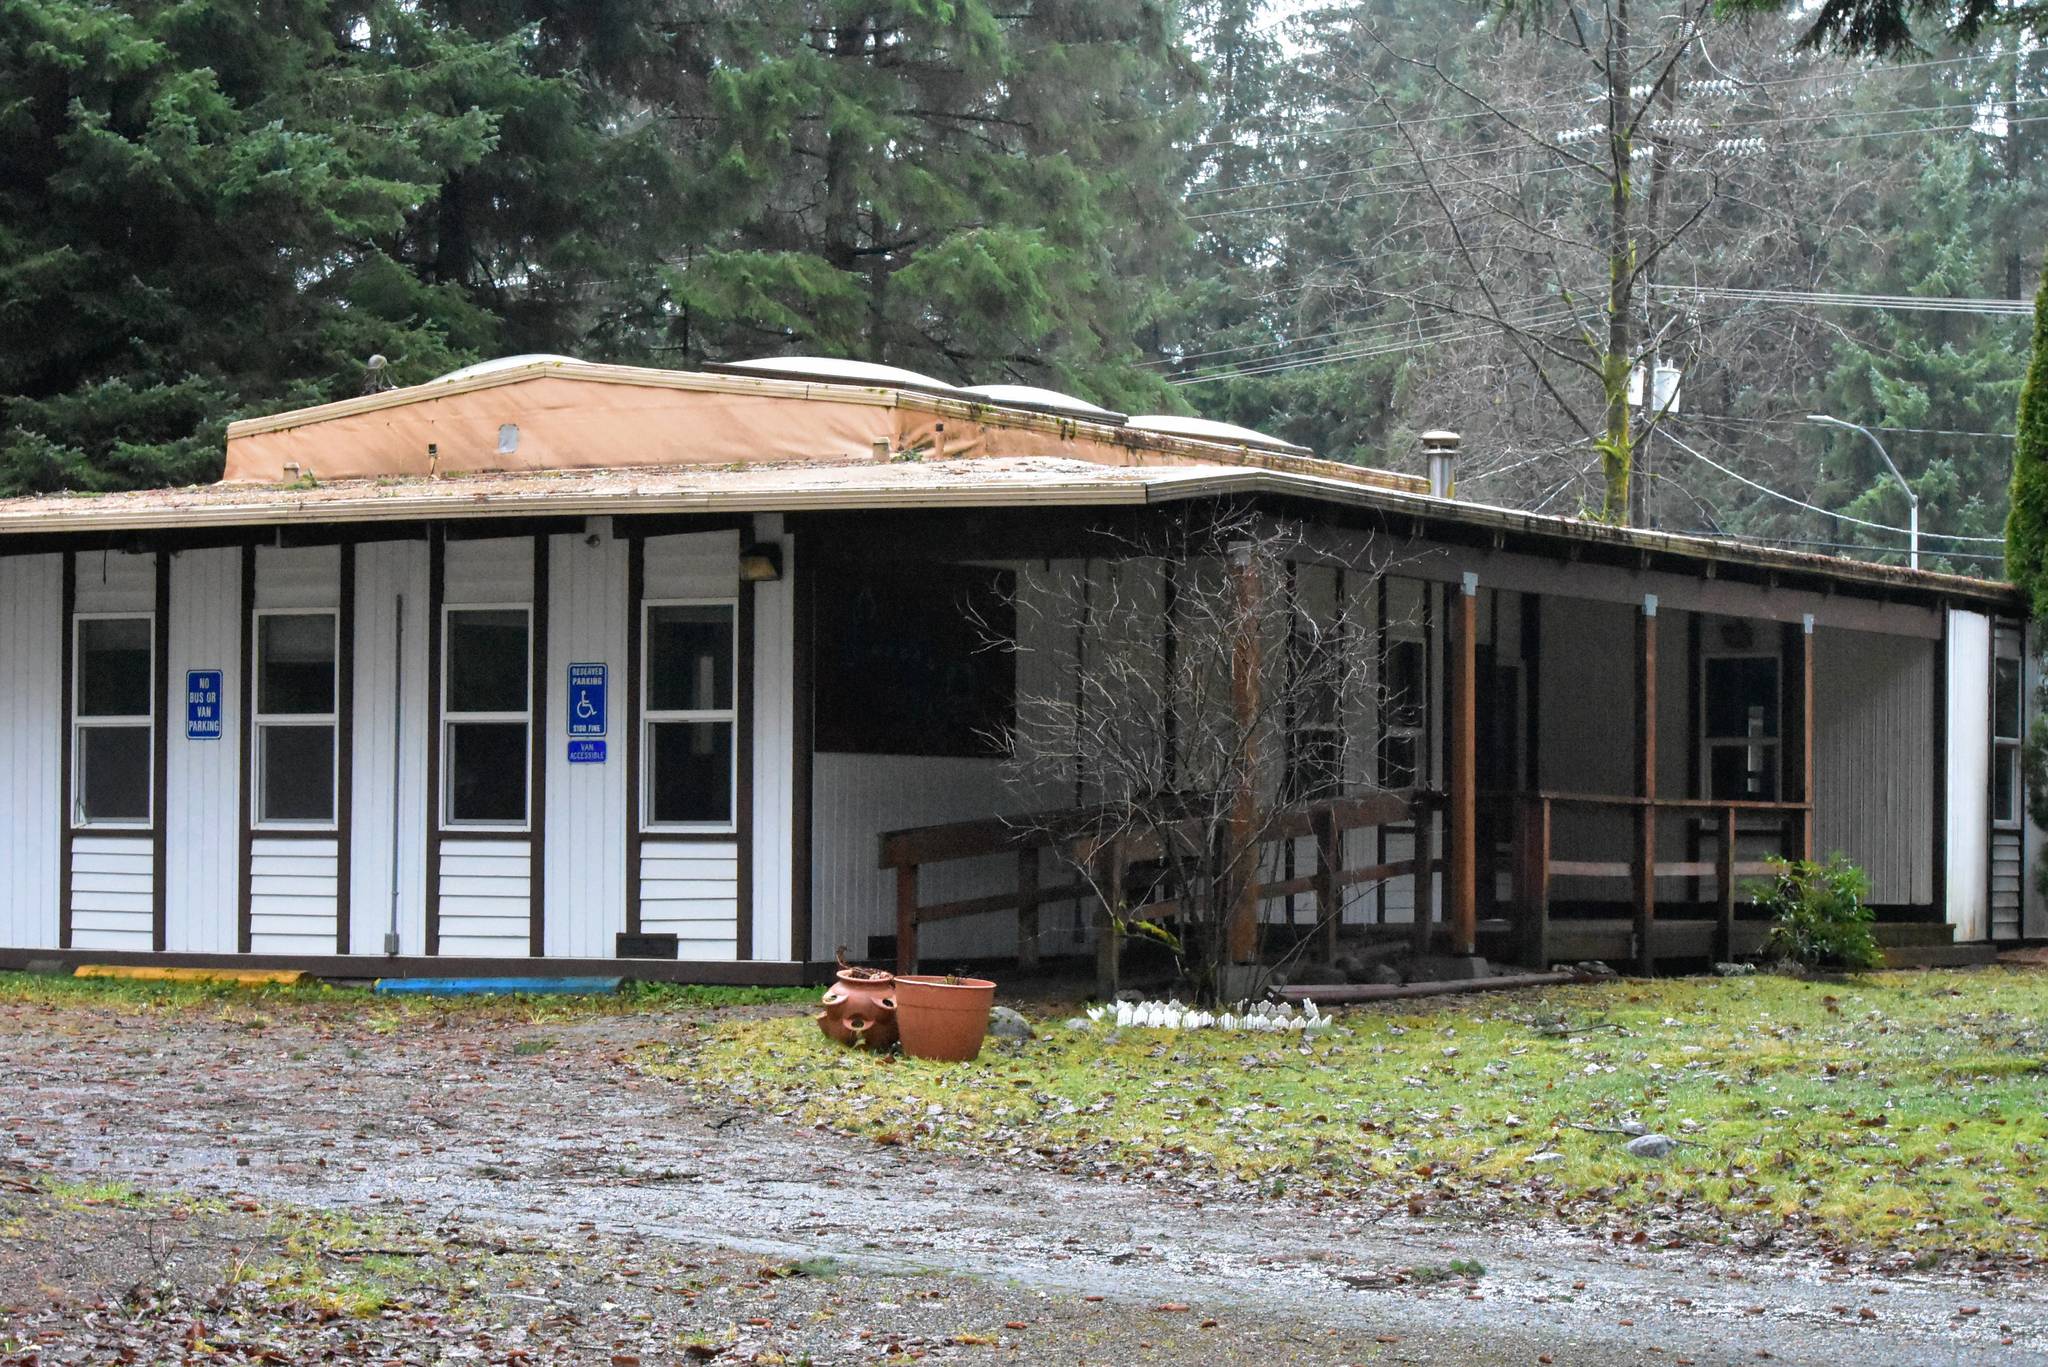 The property at 9290 Hurlock Avenue near the intersection of Egan Drive and Mendenhall Loop Road was vacant Monday, Dec. 7, 2020, but a group of nonprofit organizations are partnering to try and turn the site into a youth homeless center. (Peter Segall / Juneau Empire)